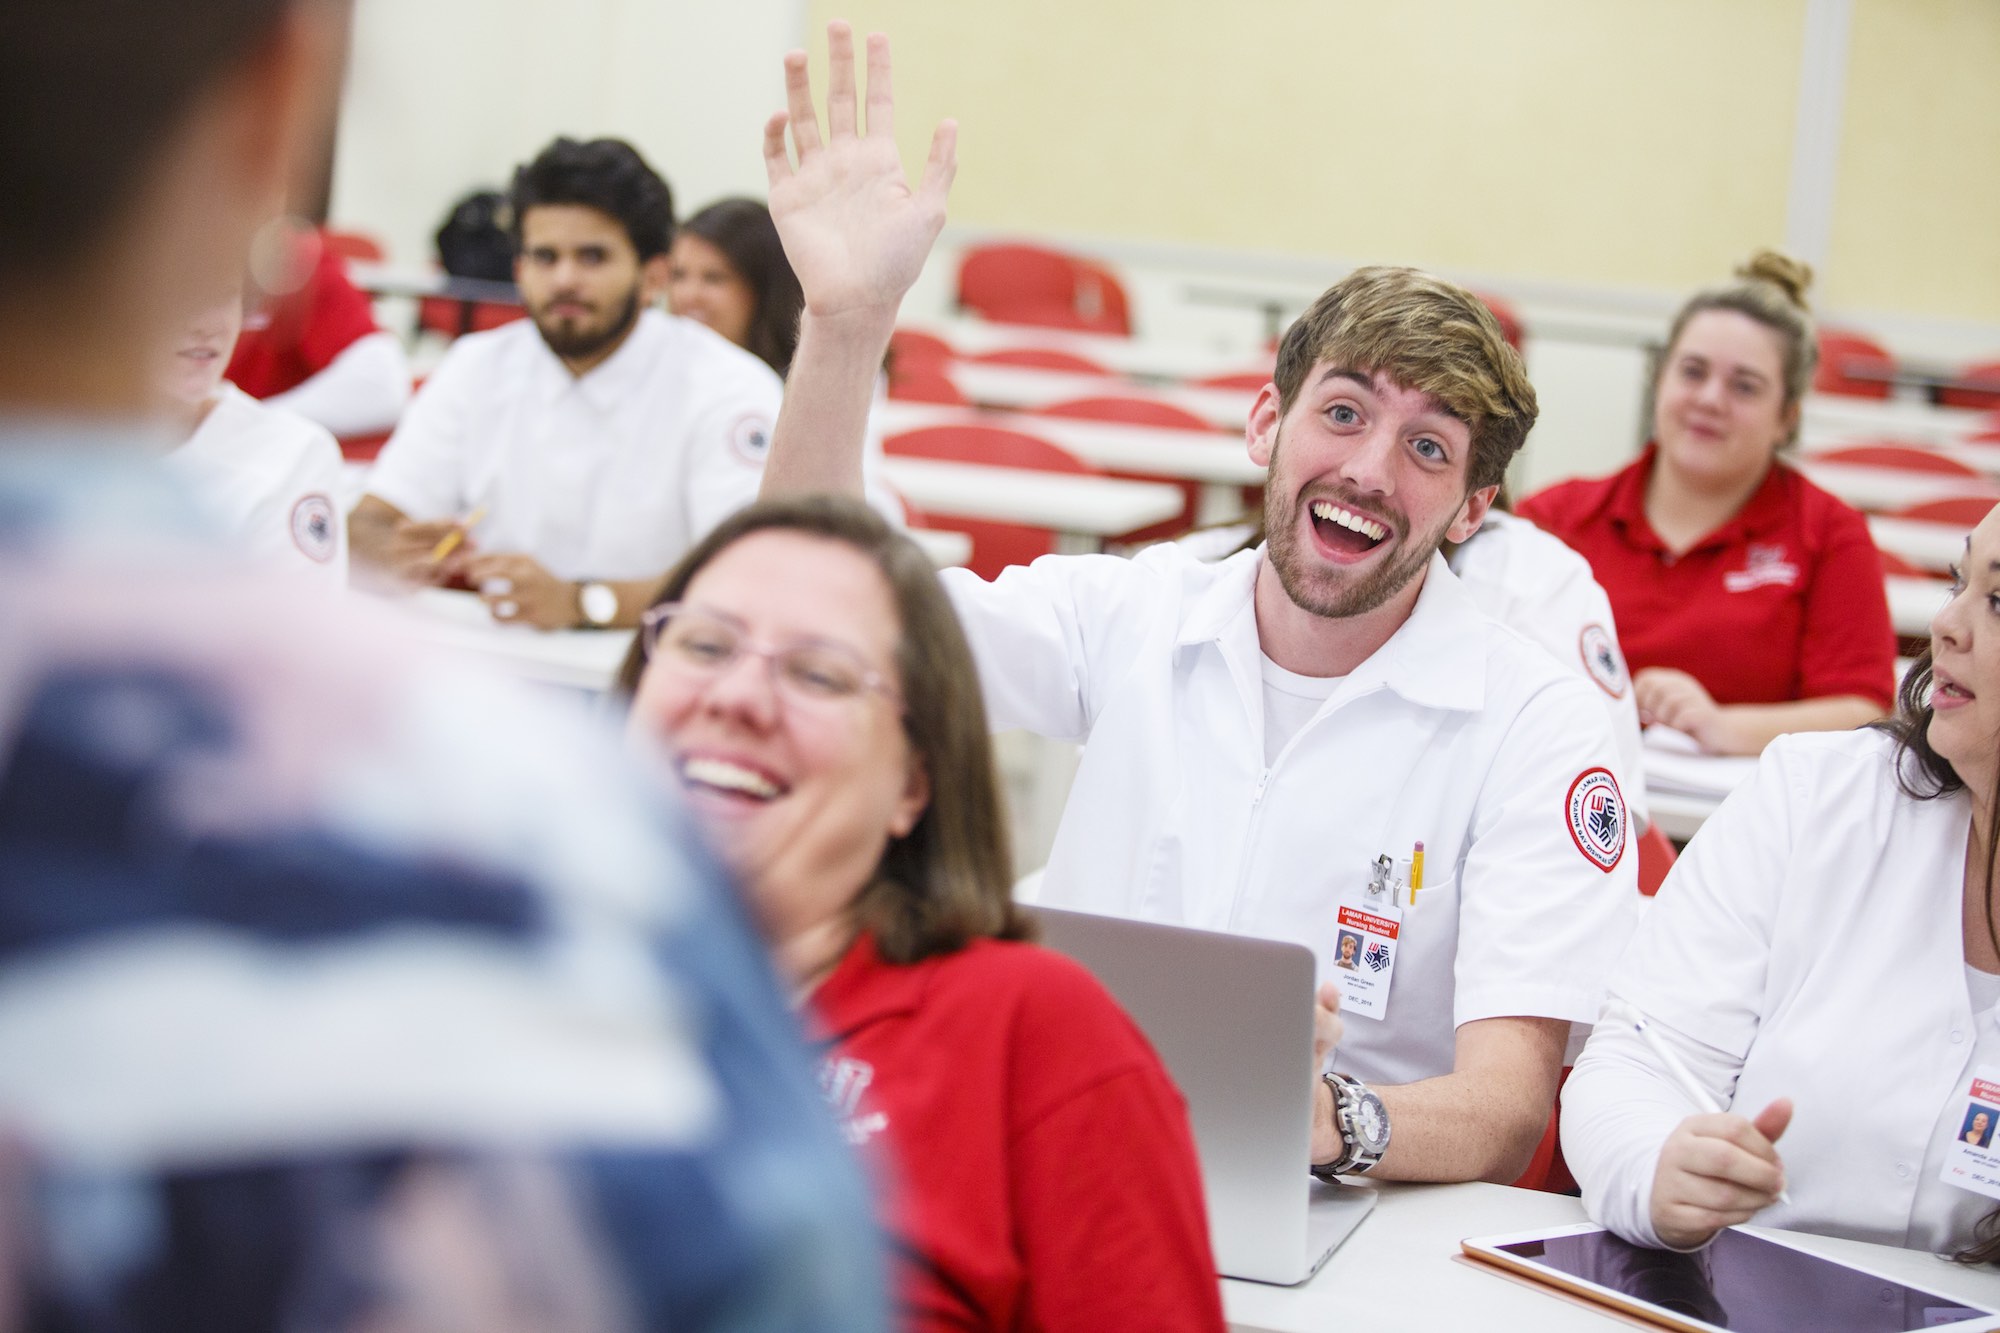 A nursing student in class raises his hand to ask a question.